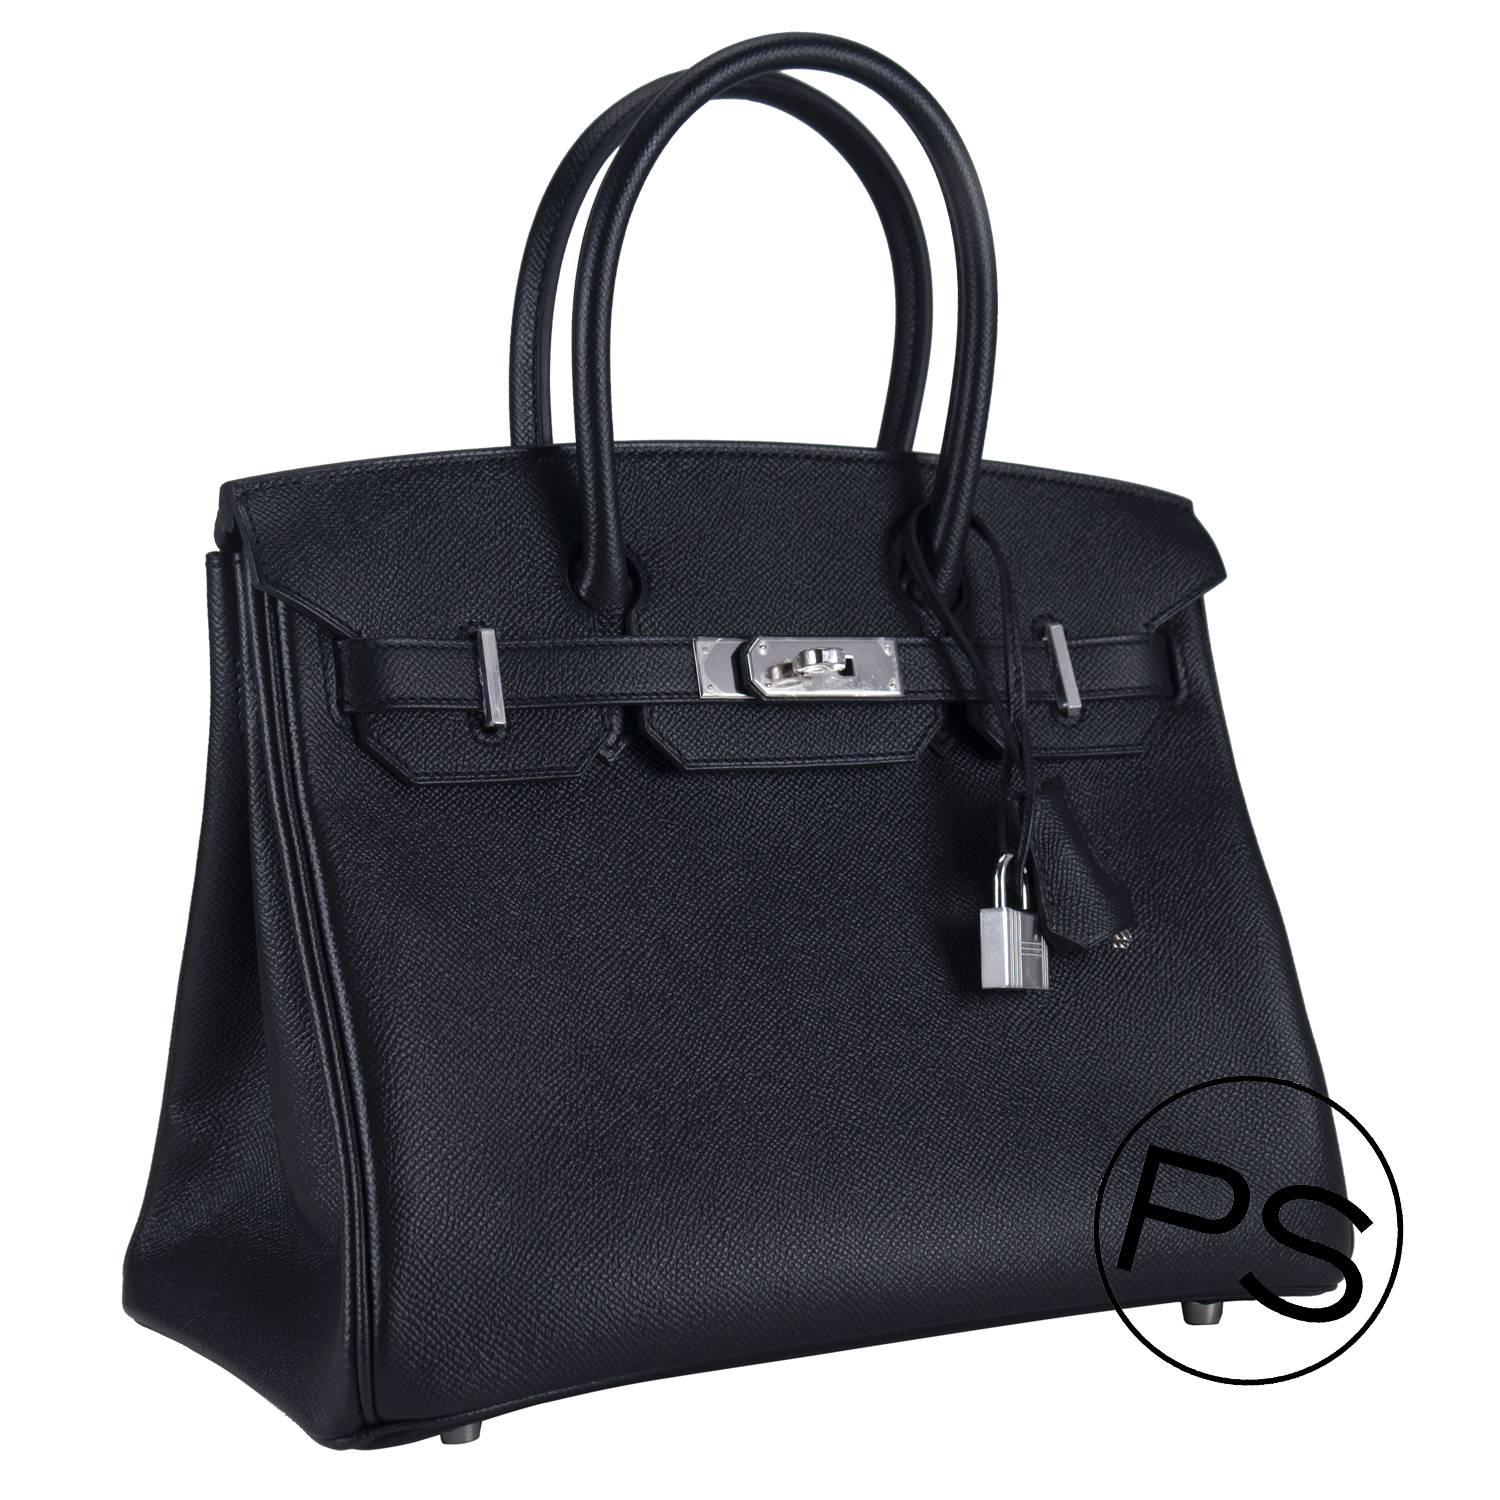 Hermes Handbag Birkin 30 Togo Black Palladium Hardware 2015.

Bought it in Hermes store in 2015.

Pre-owned and never used.

Model: BIRKIN

Dimension: 30cm width x 22cm height x 16cm length.

Leather: Togo.

Color: